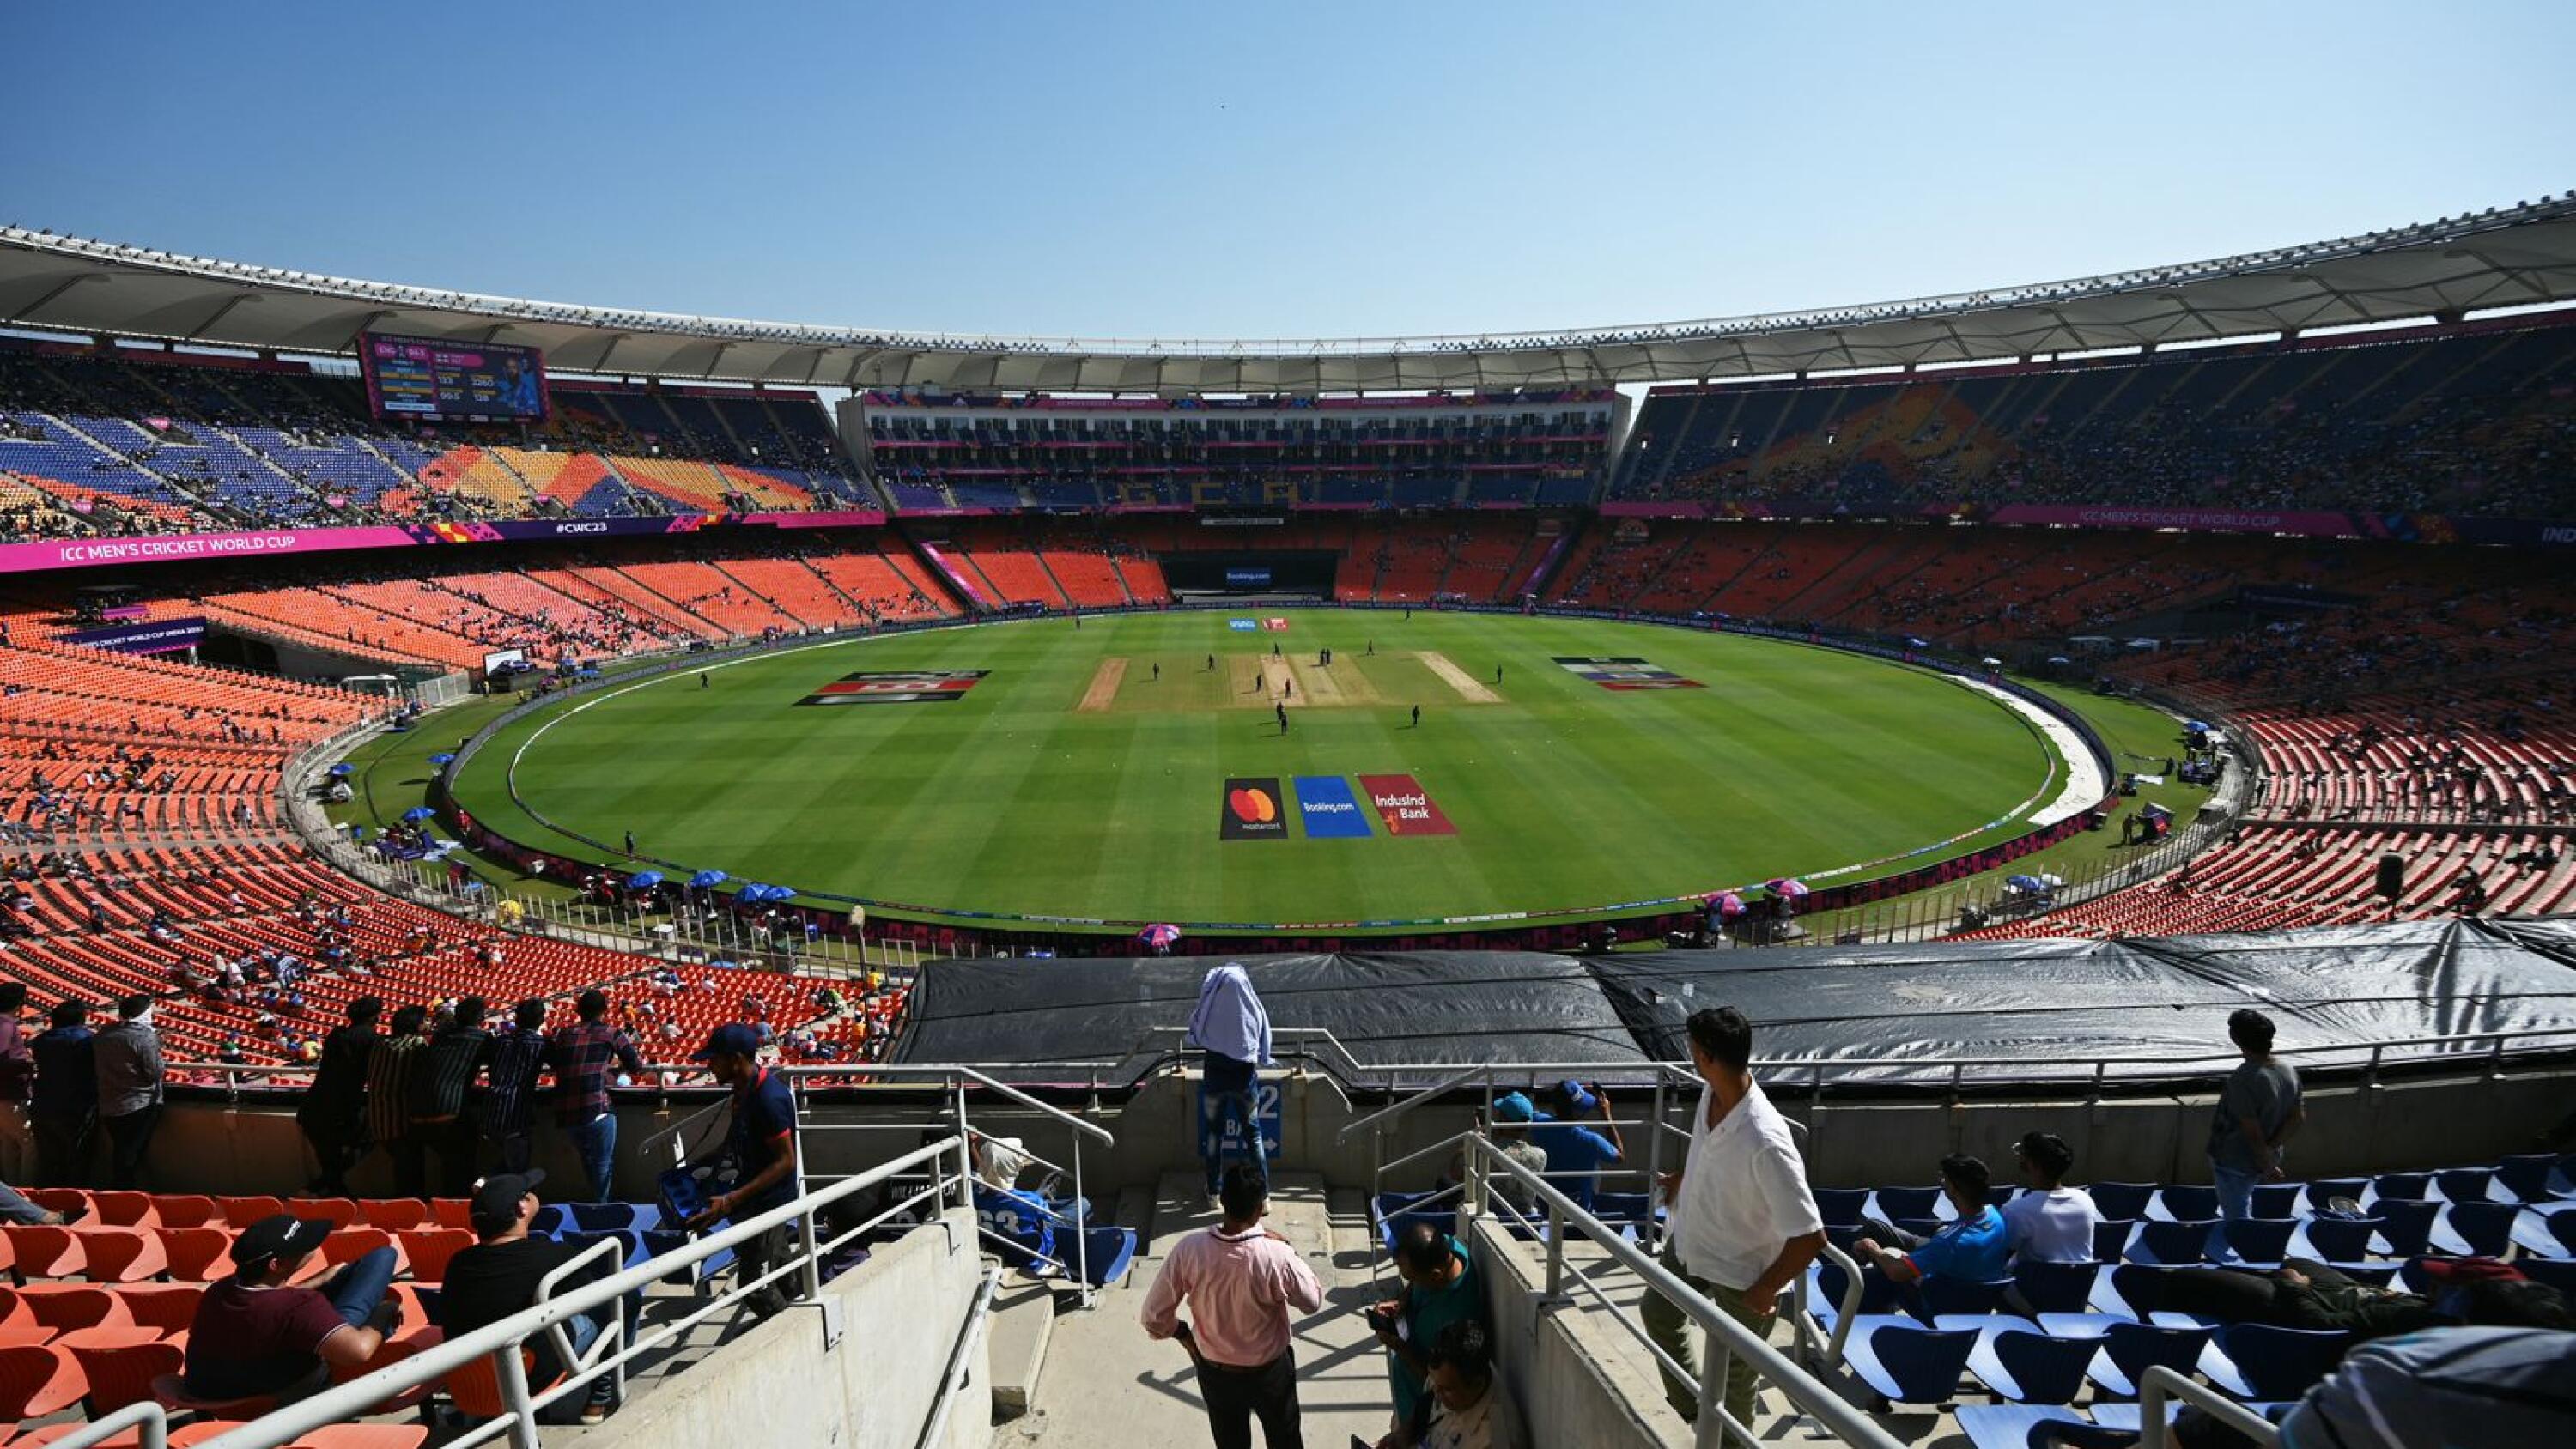 This picture shows a general view of the Narendra Modi Stadium during the 2023 ICC men's cricket World Cup one-day international (ODI) match between England and New Zealand in Ahmedabad